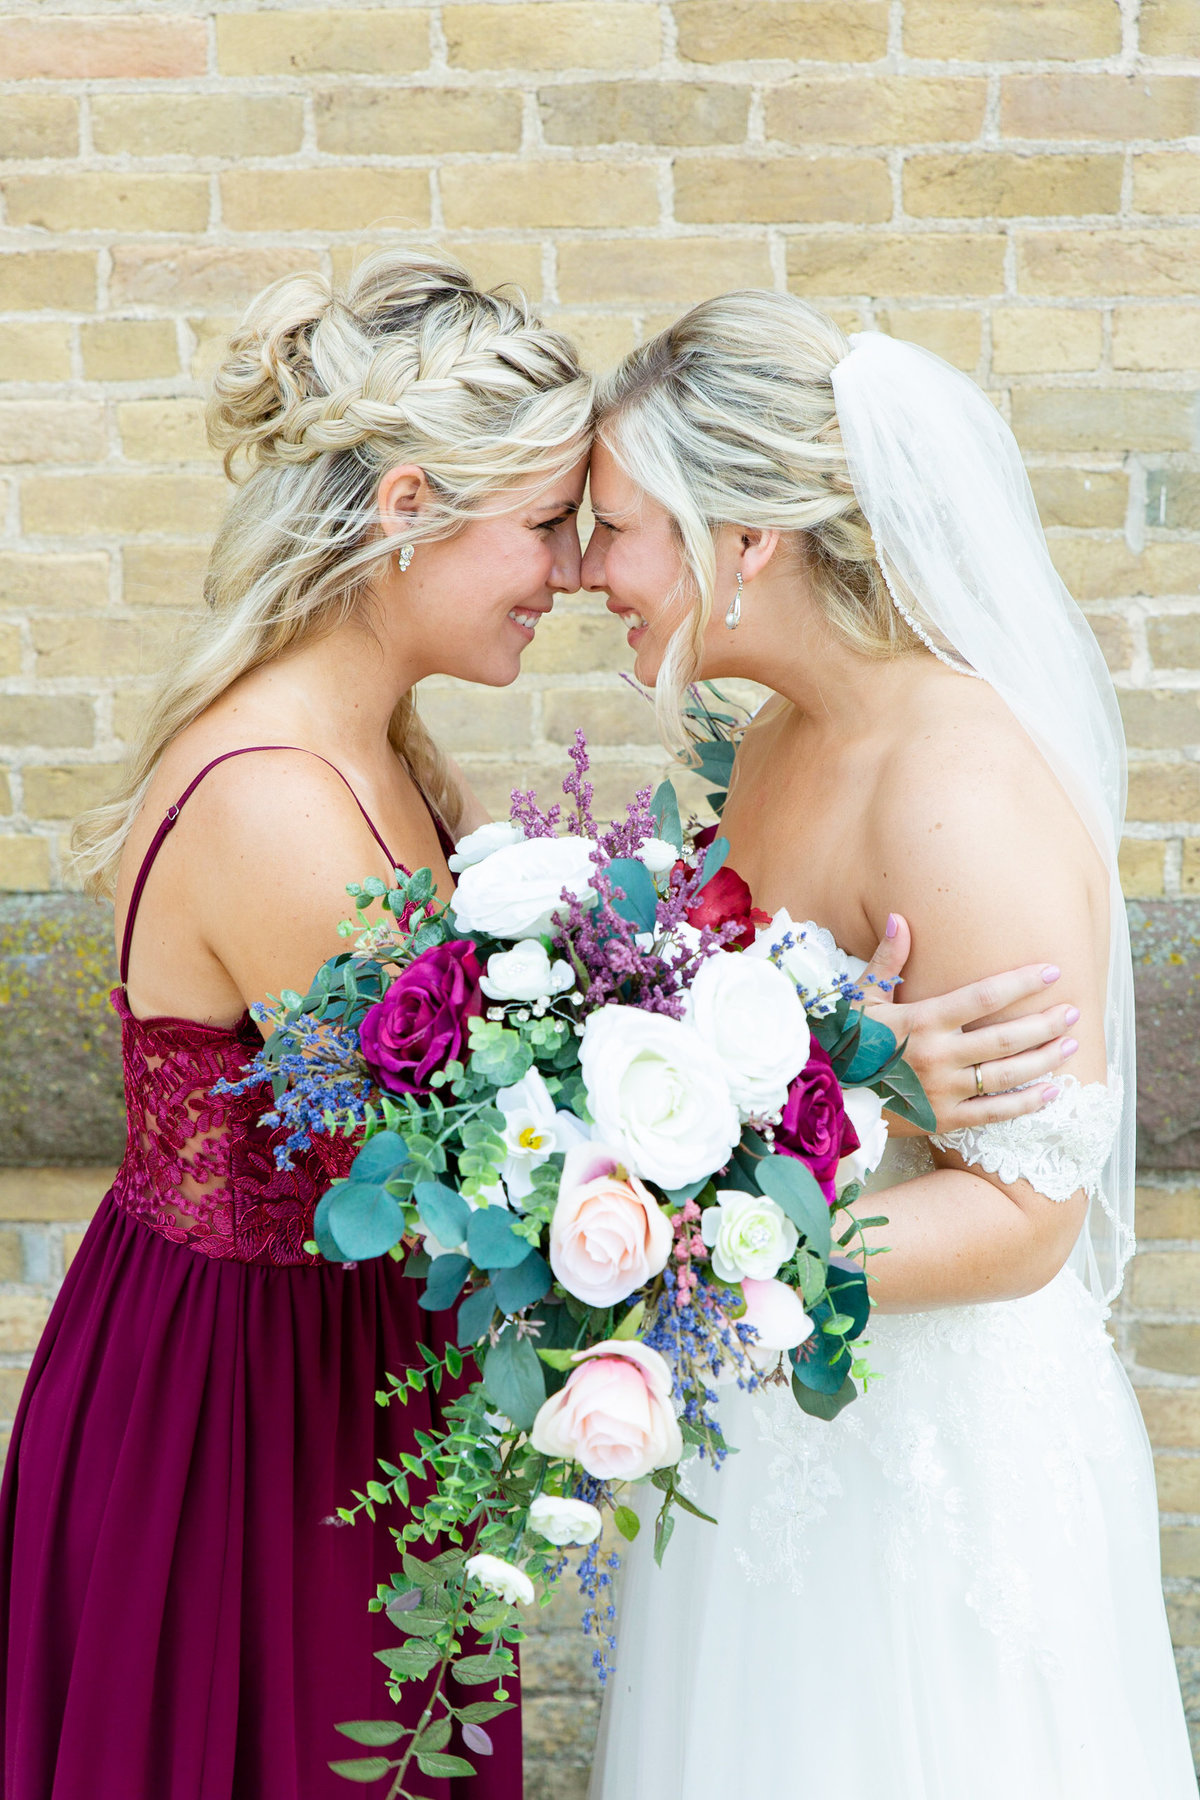 Sisters, bride and matron of honor share moment before wedding